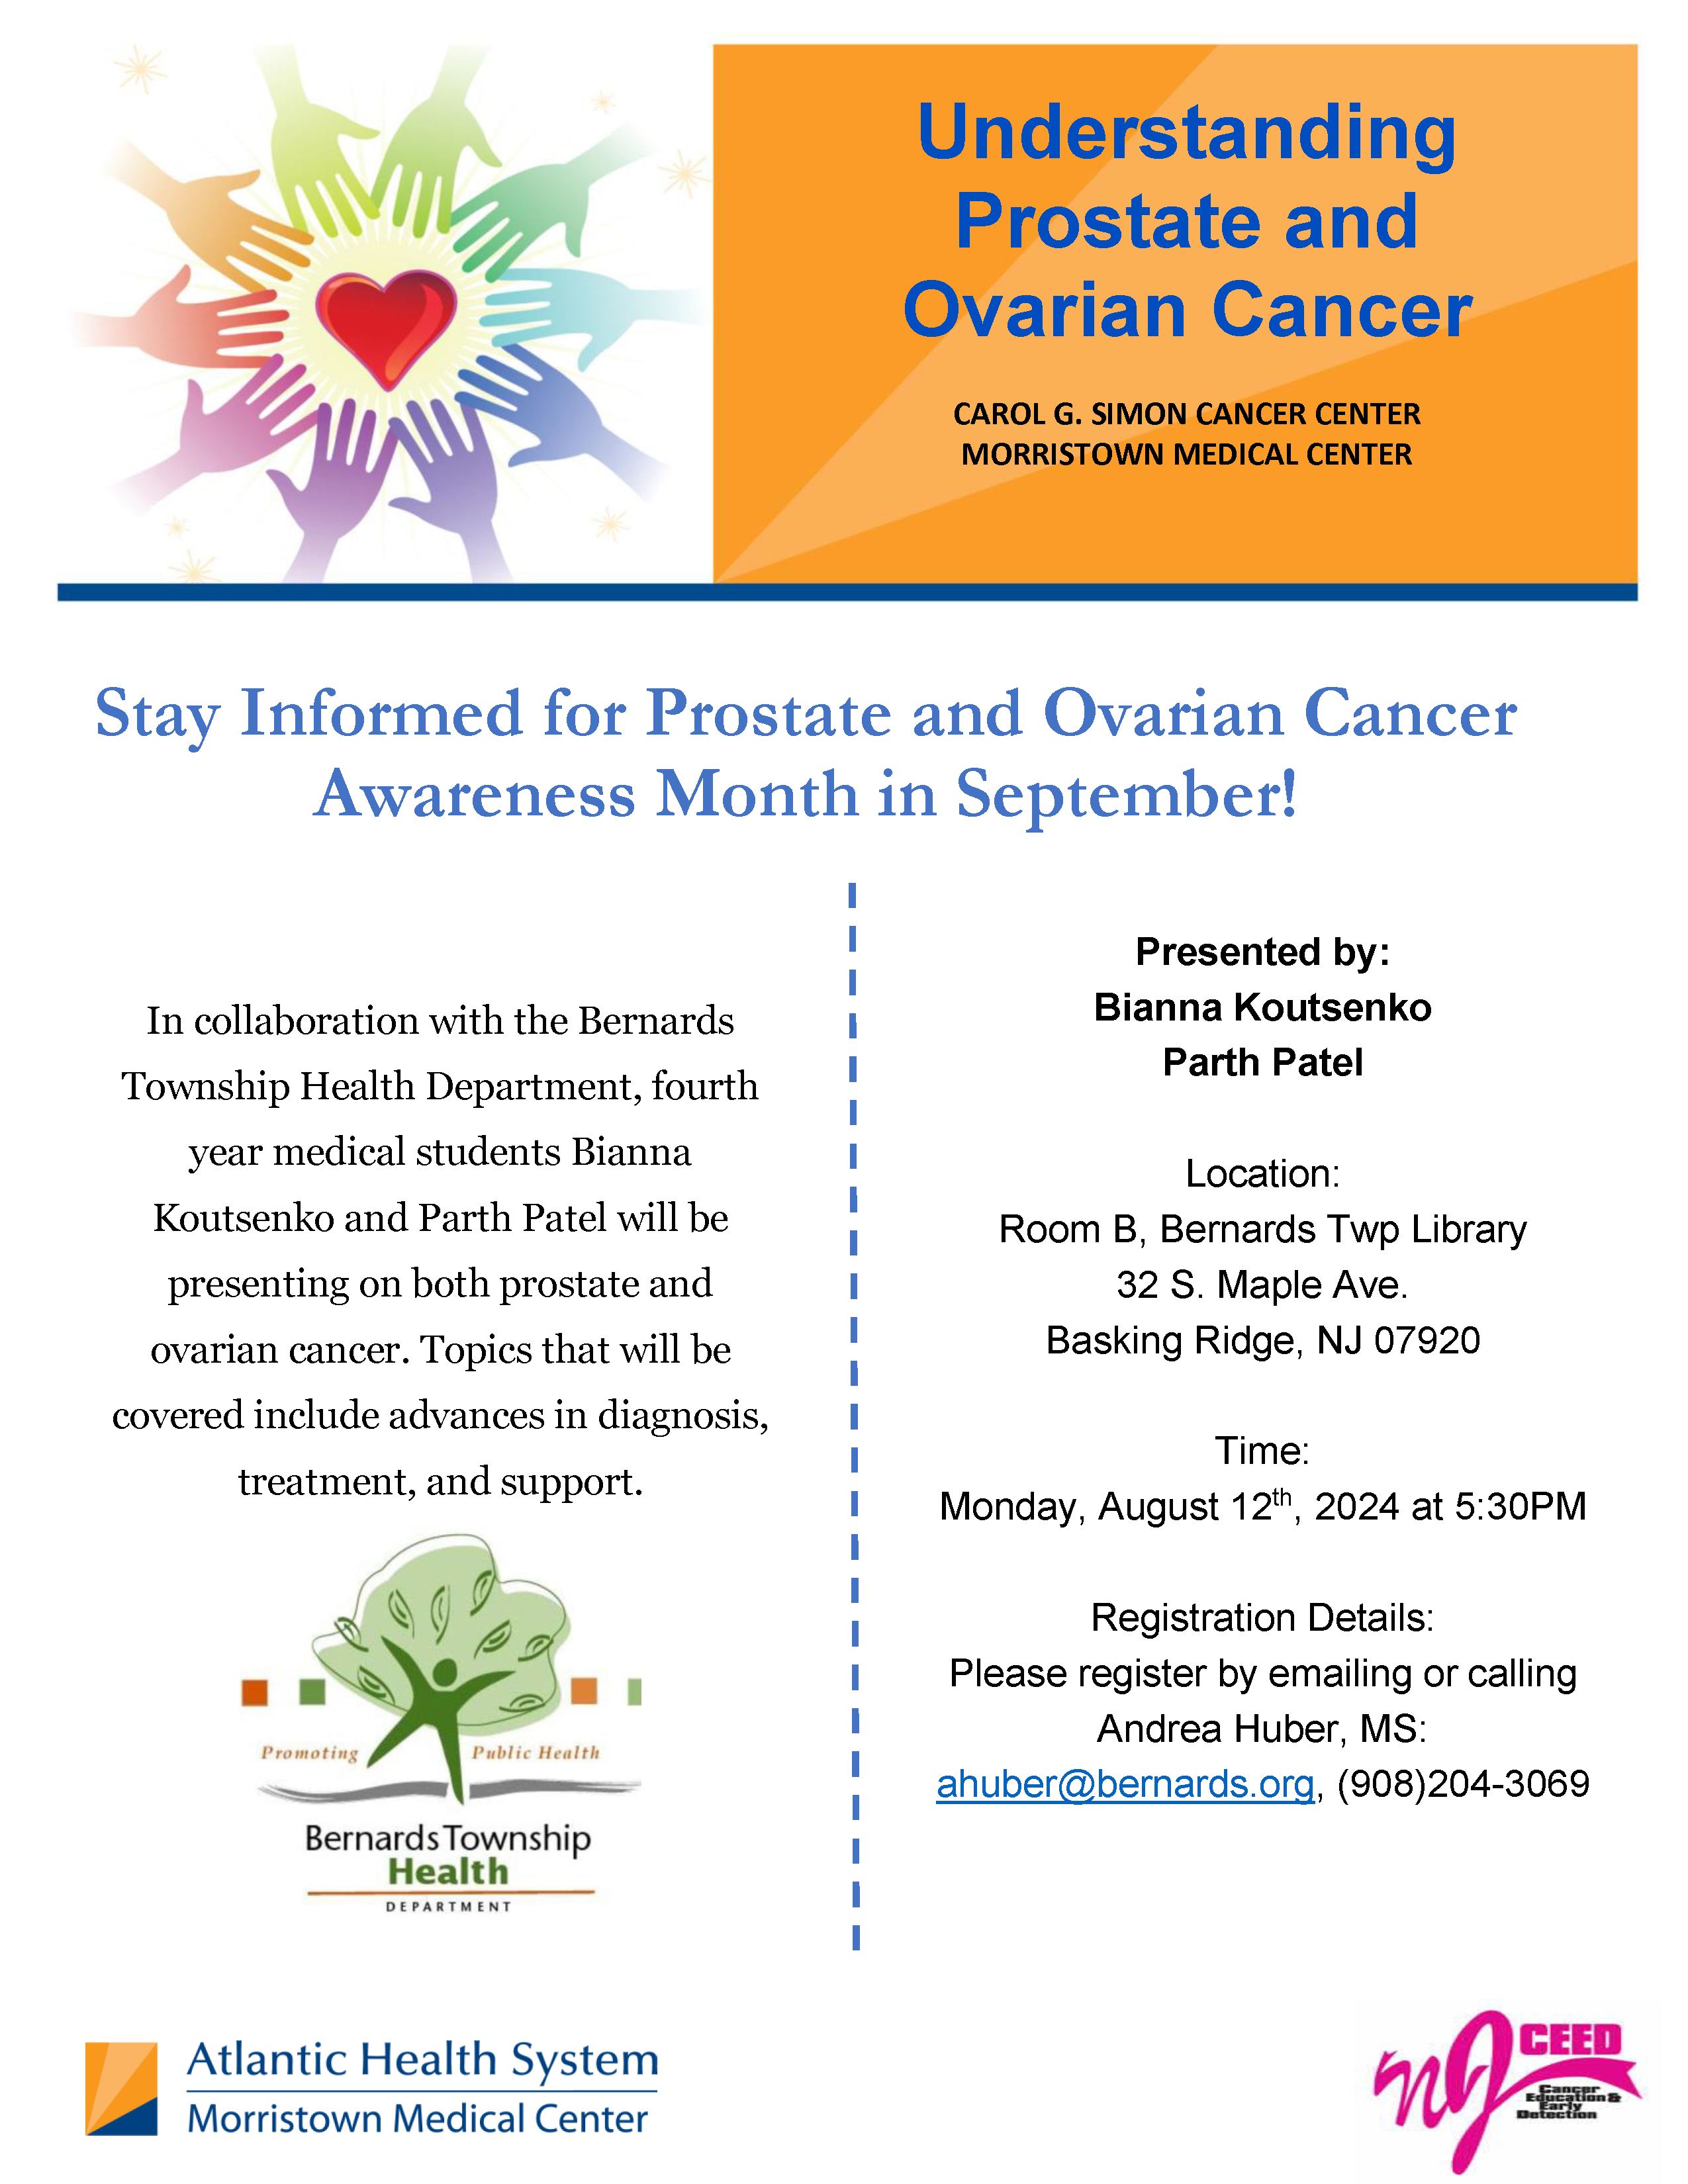 Prostate and Ovarian Cancer Presentation Flyer. Click to open an OCR scanned PDF version of it.